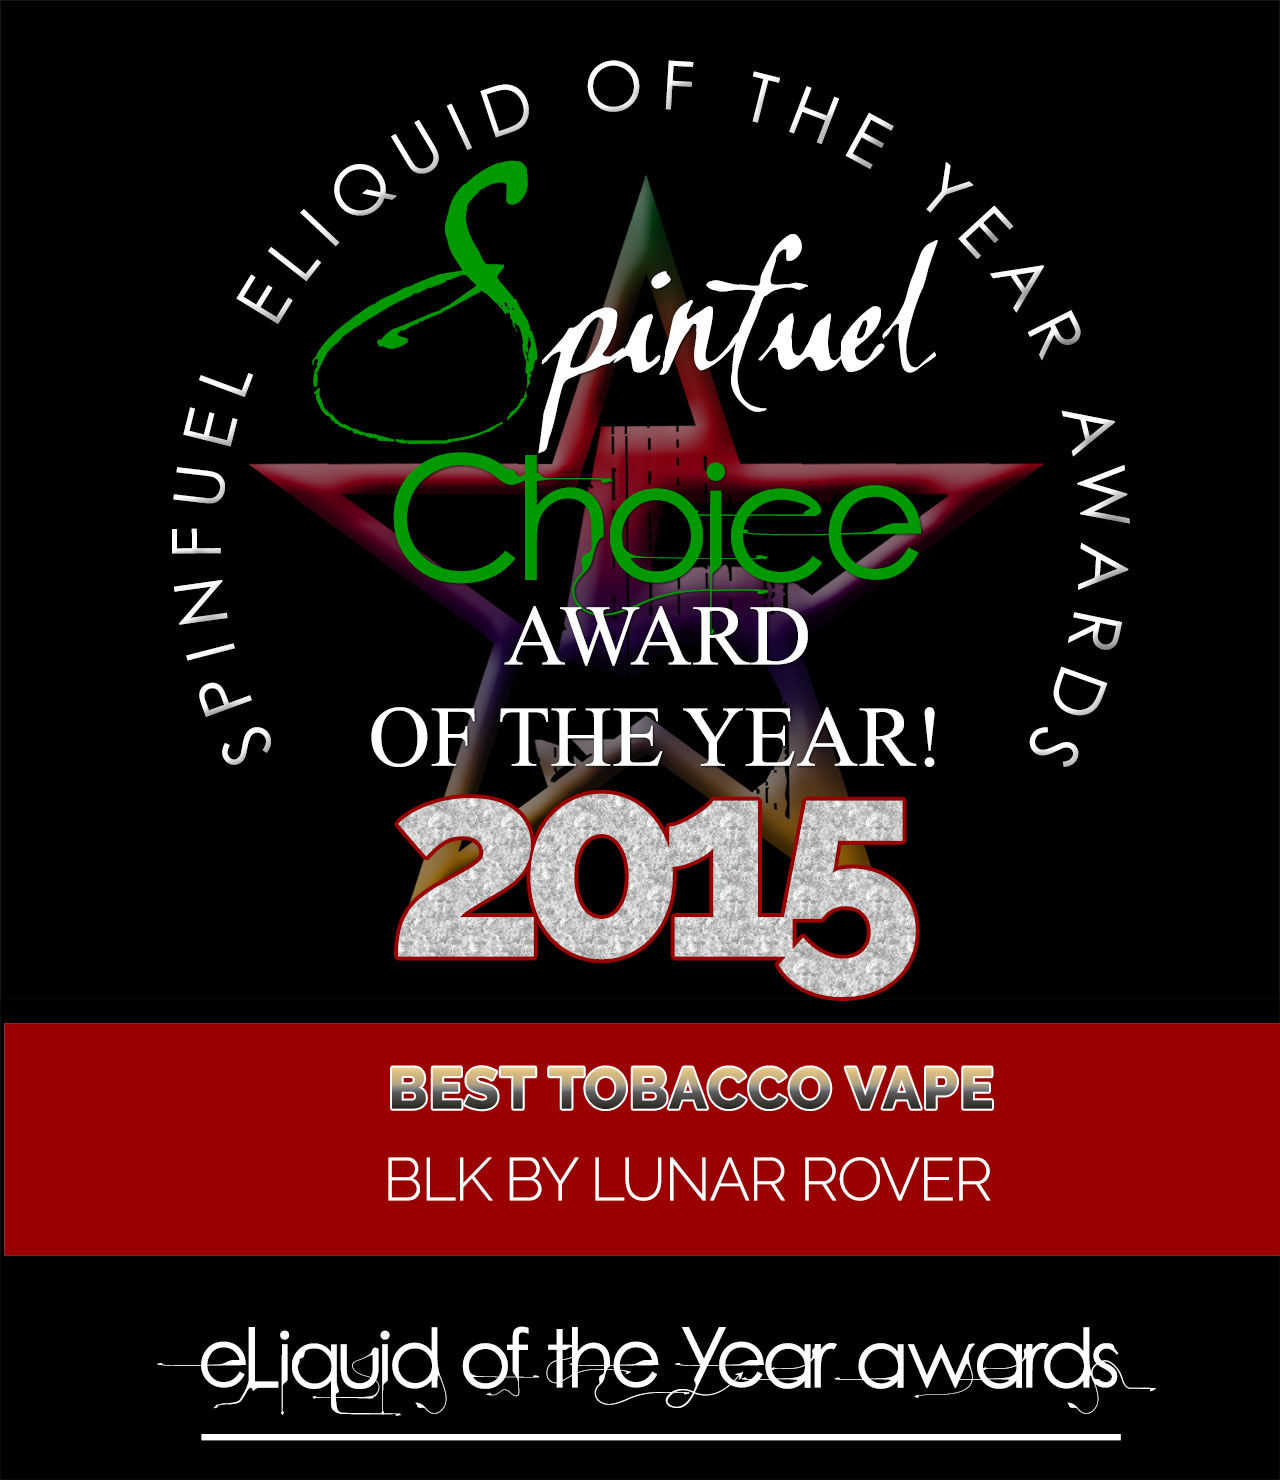 BEST-TOBACCO-BLK Spinfuel Choice Award